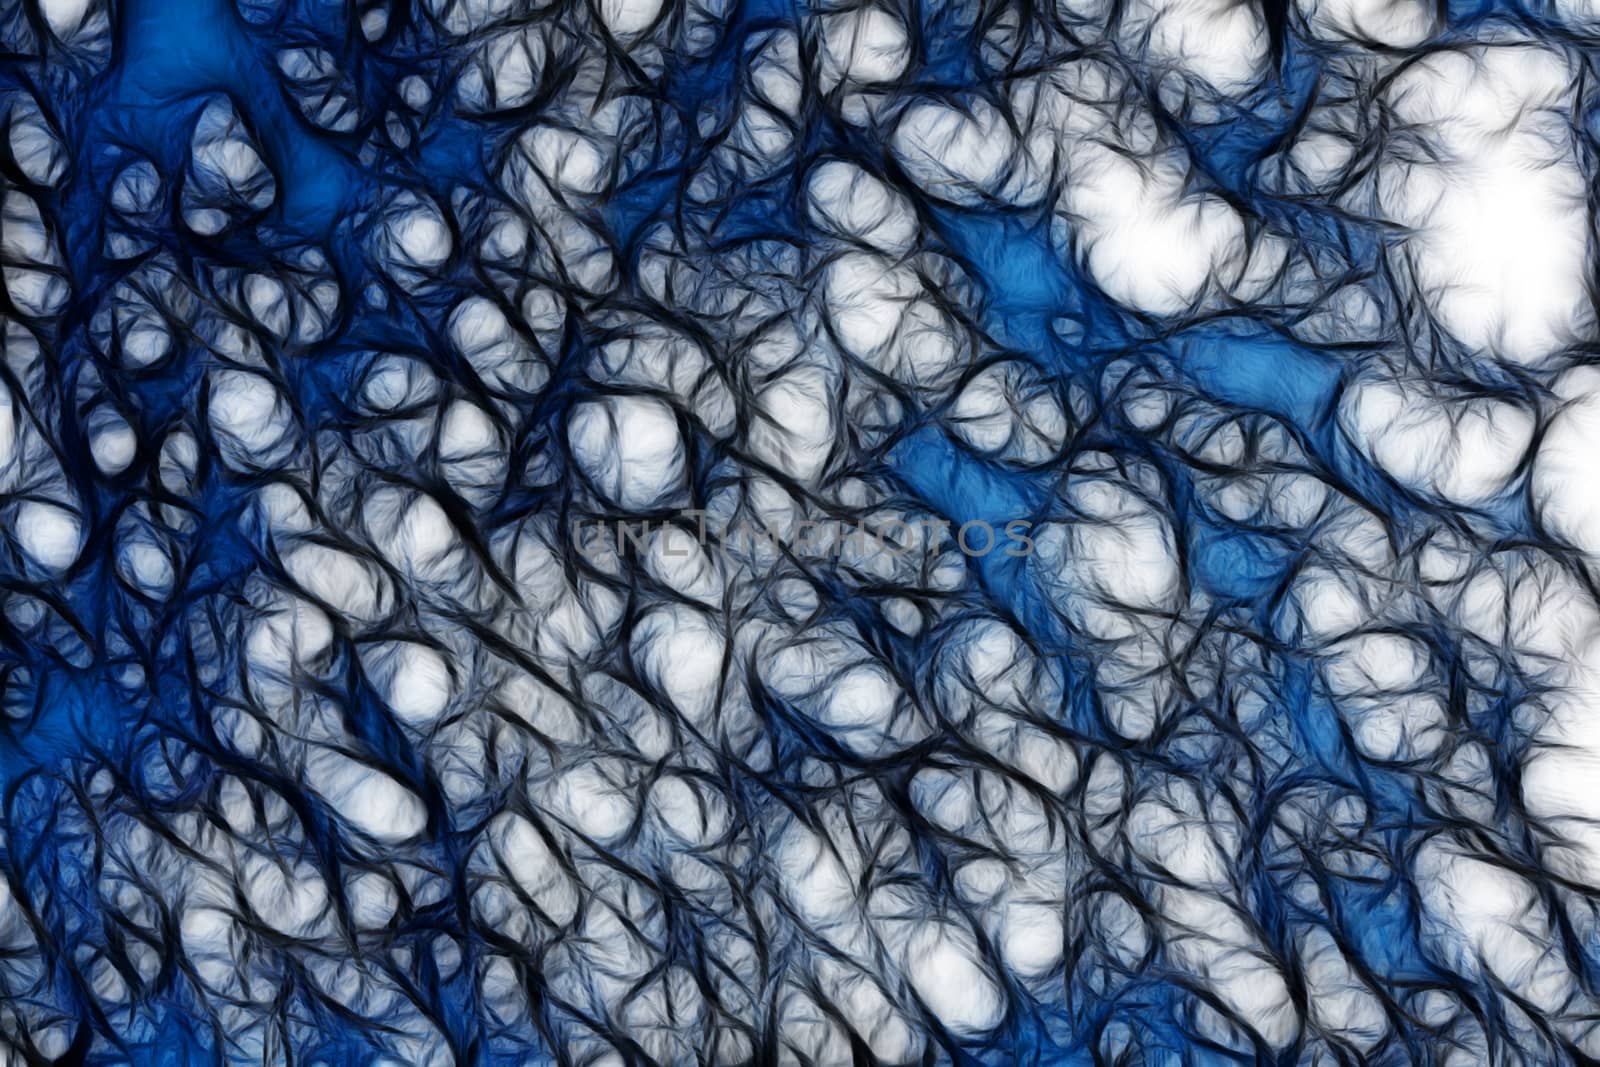 Abstract background of blue tones with a chaotic pattern